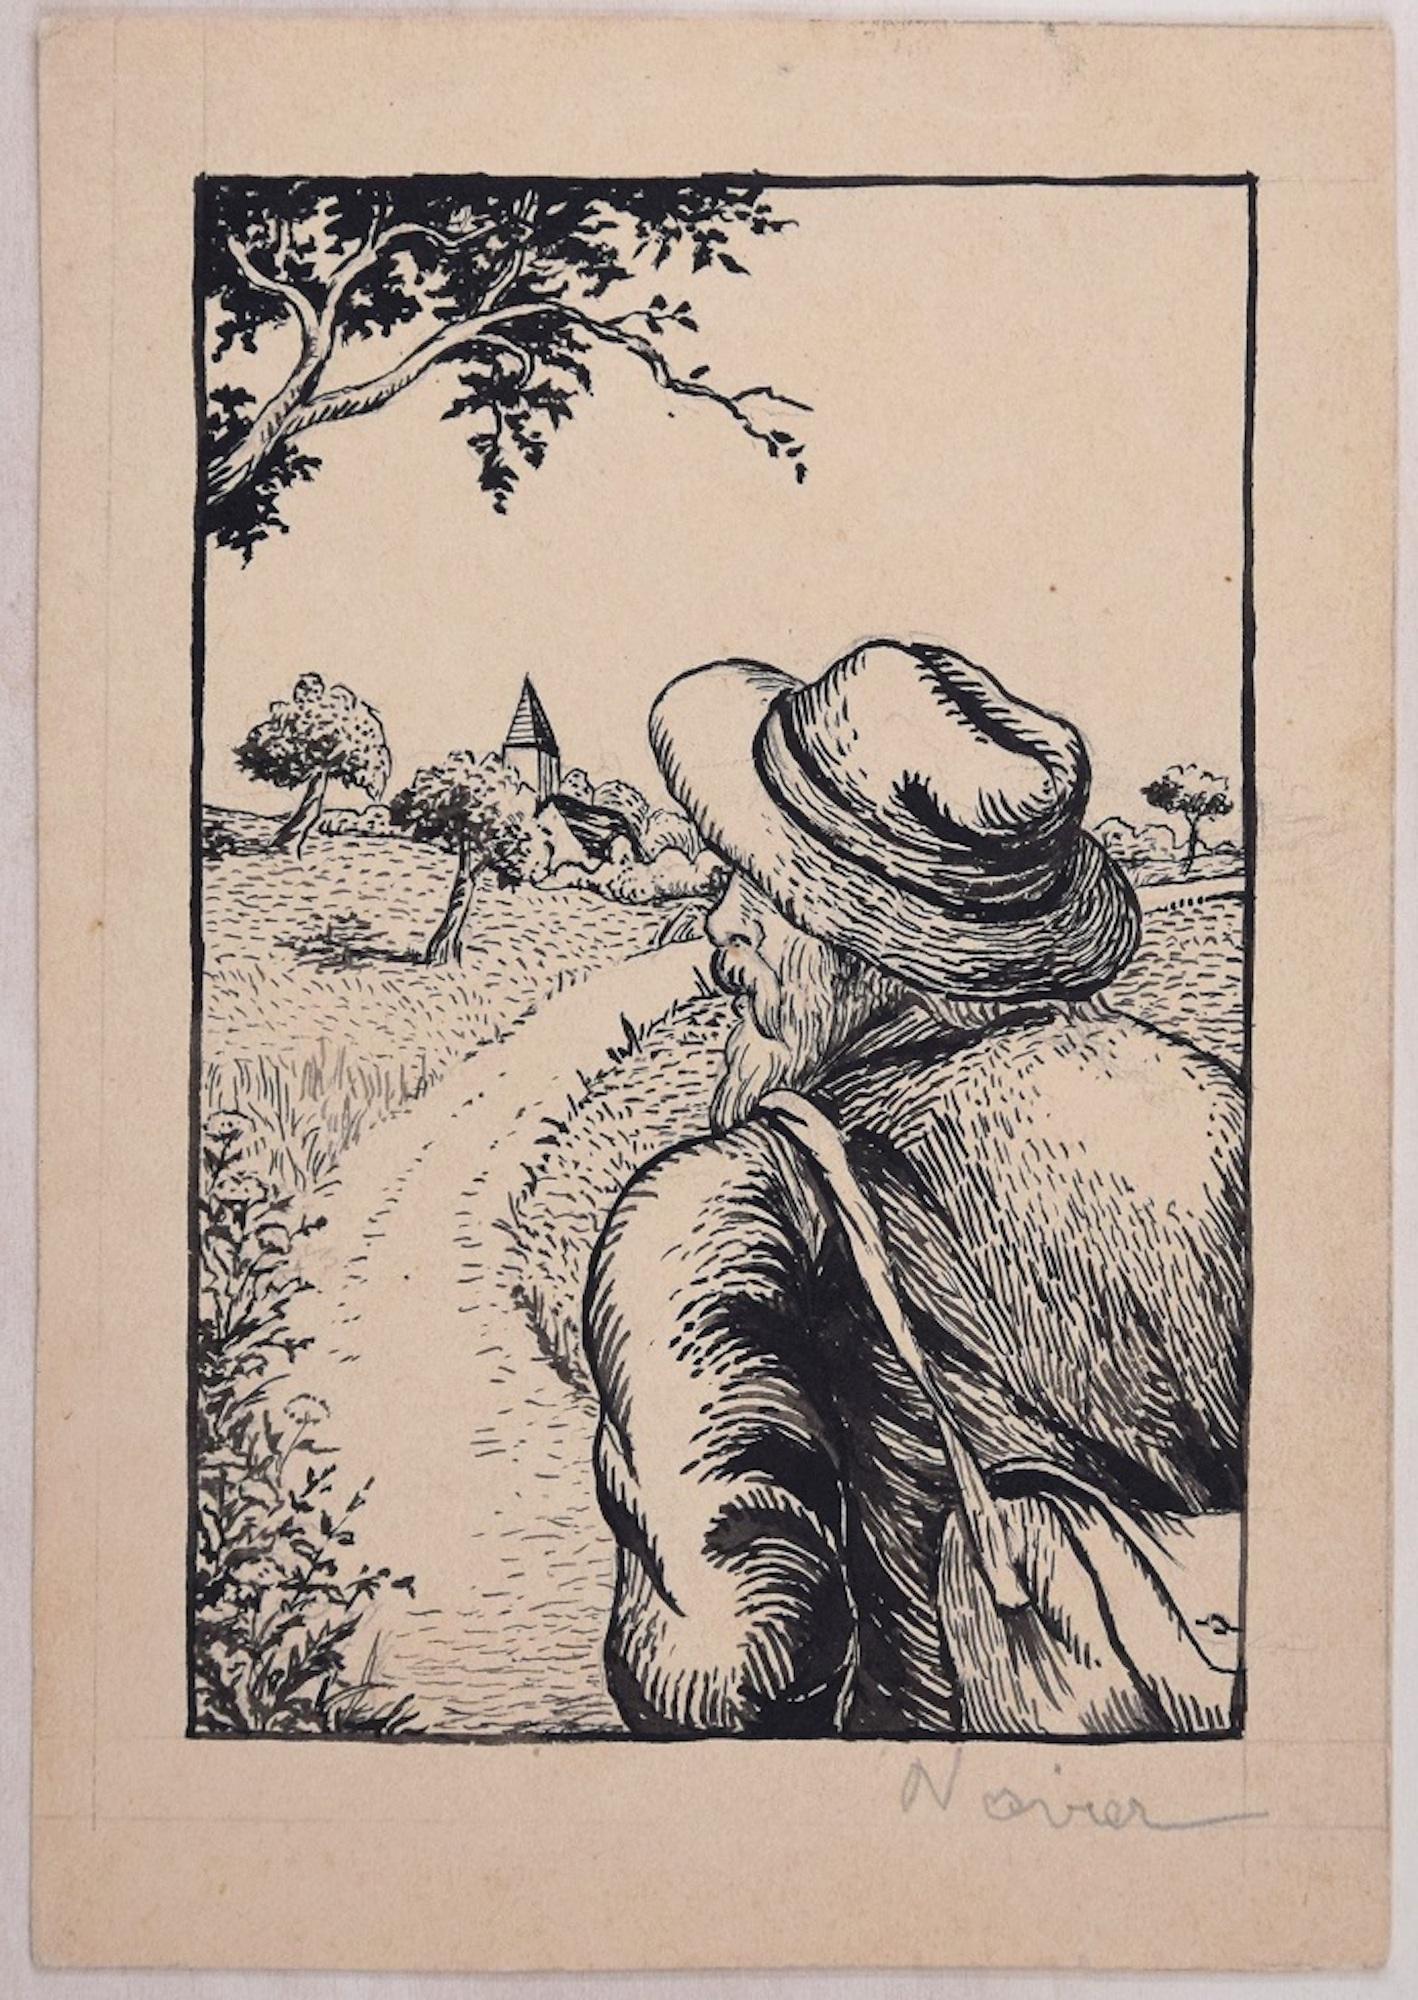 Image dimensions 19.5x13.5 cm.

Man in the Field is an original artwork realized by Lucie Navier in 1934.

China ink on paper. 

Hand-signed in pencil on the lower right corner. 

Good conditions. 

Fresh composition representing a man in a field